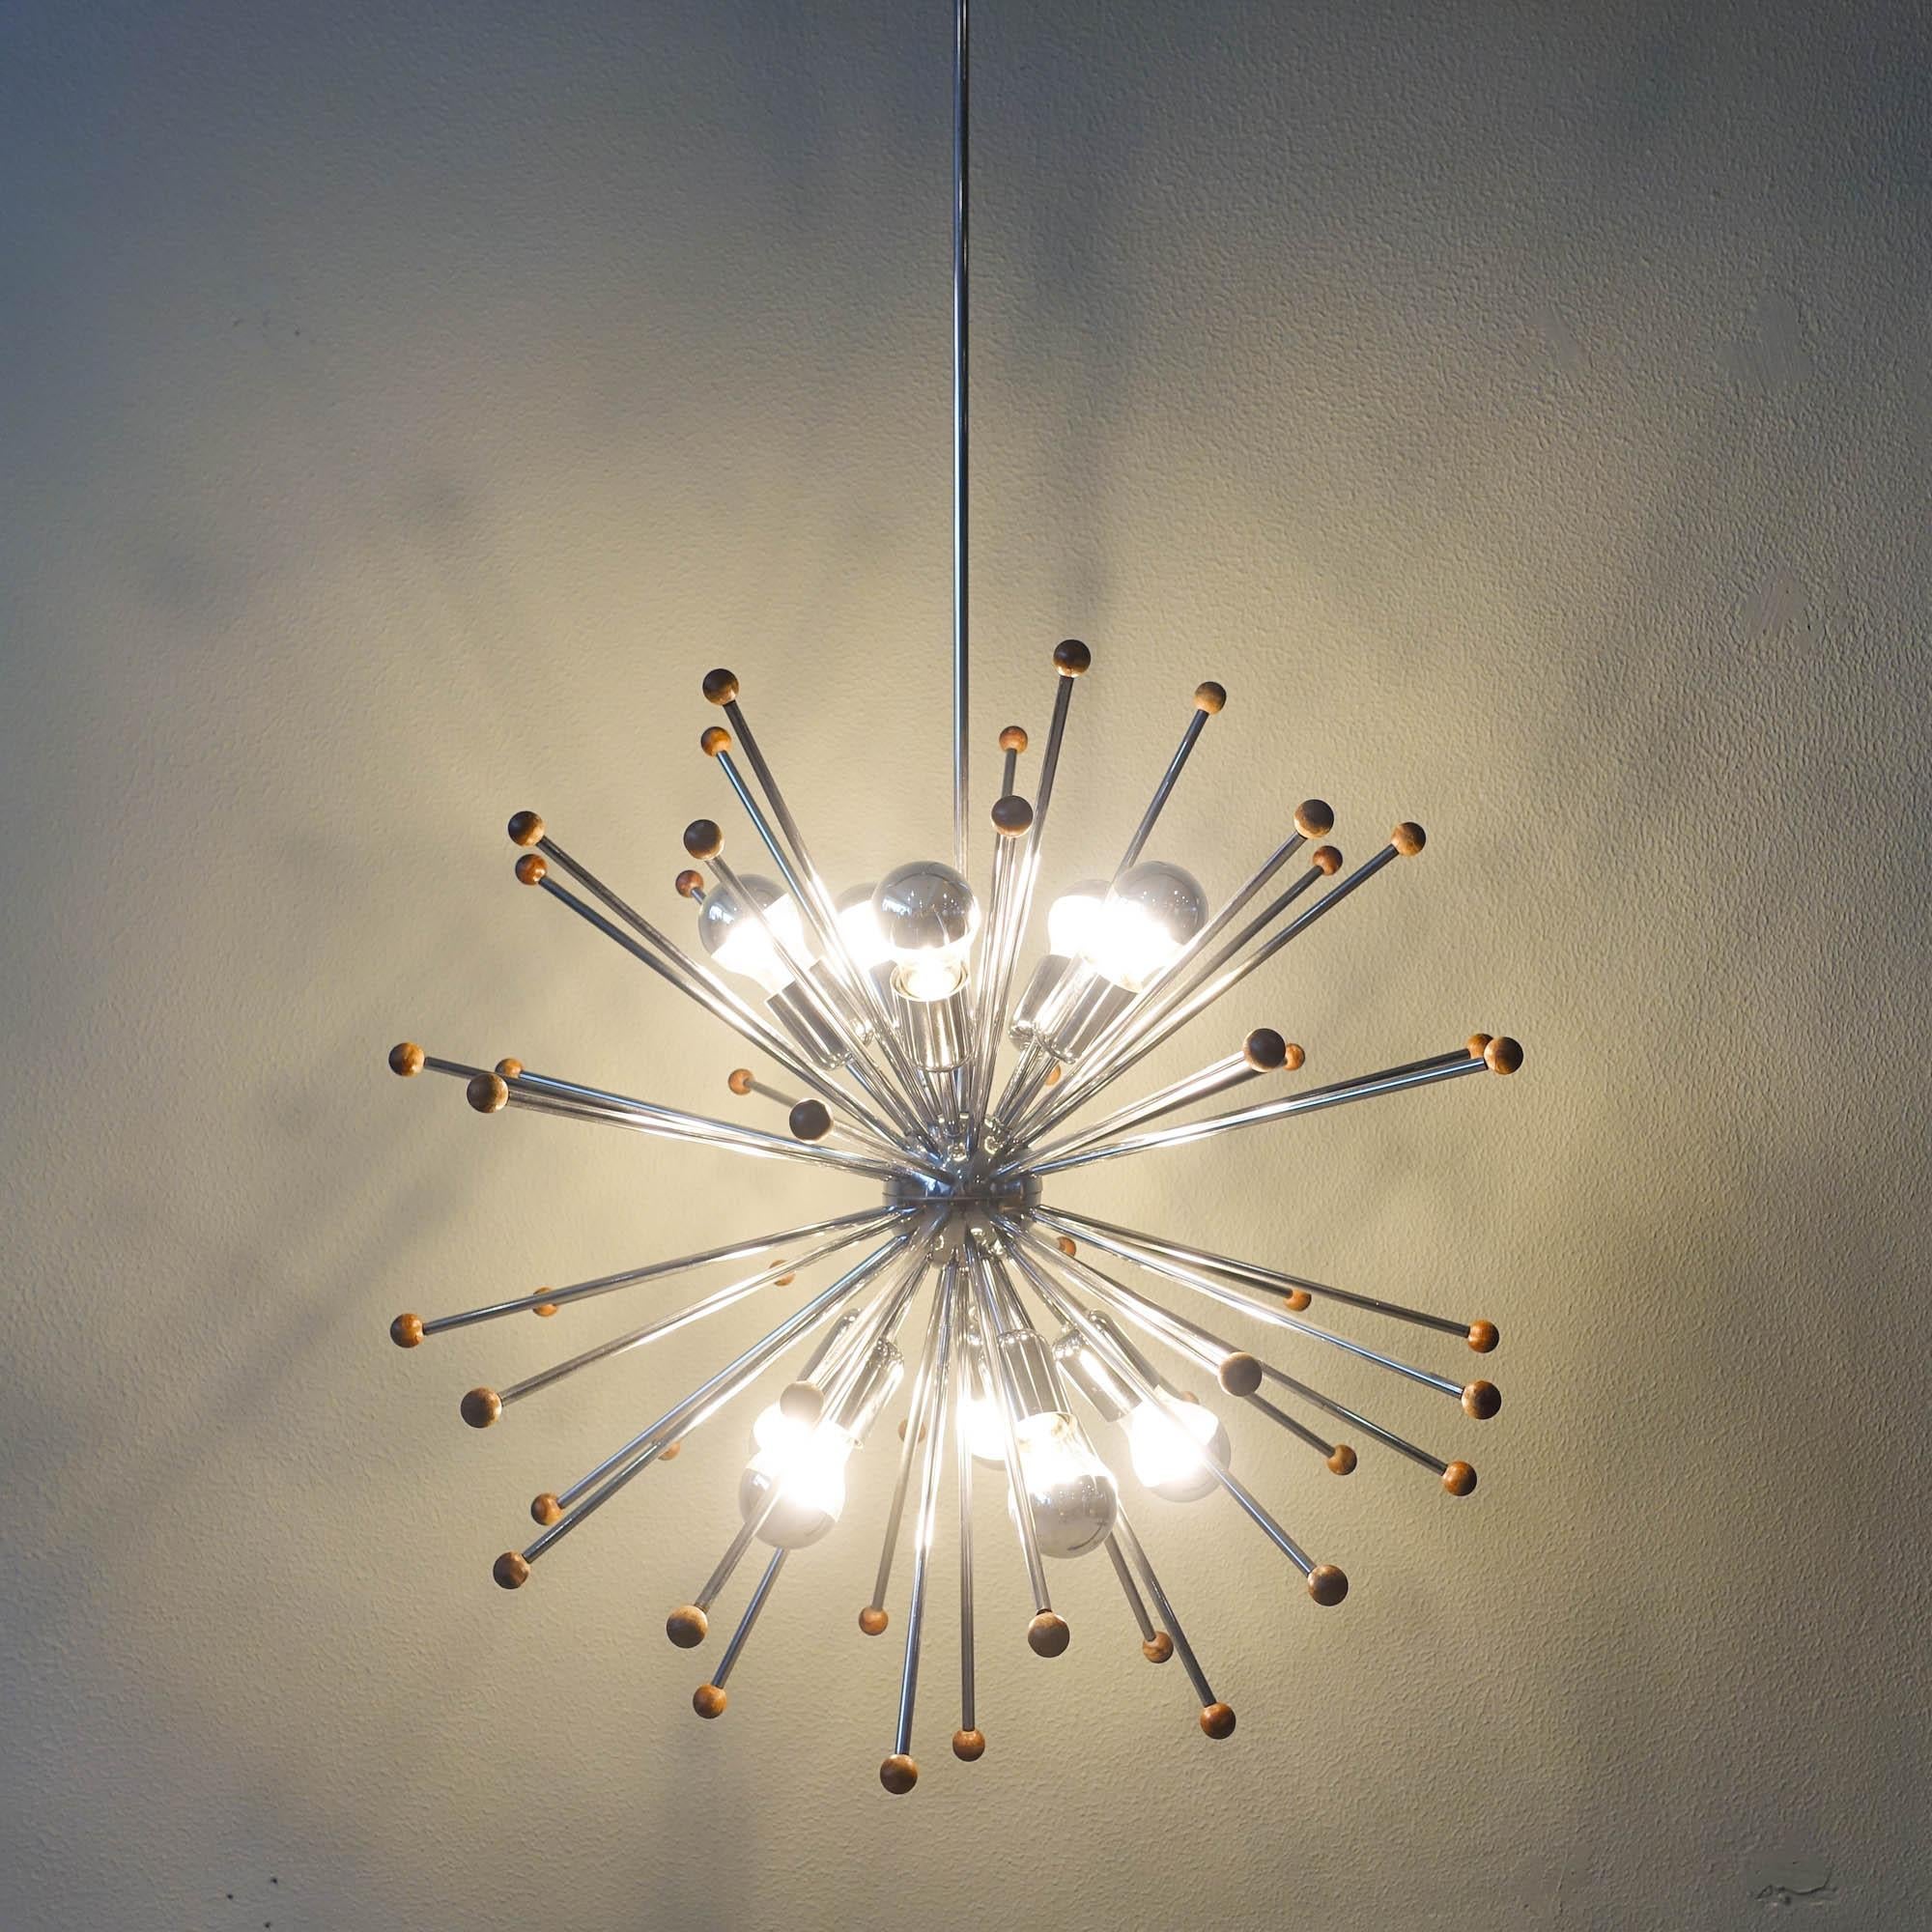 This ceiling lamp was designed and produced in Italy during the 1970's. It is a large chromed Sputnik chandelier with 10 light points. With a chrome globe in the middle were chromed metal rods are attached and point in every direction with teak